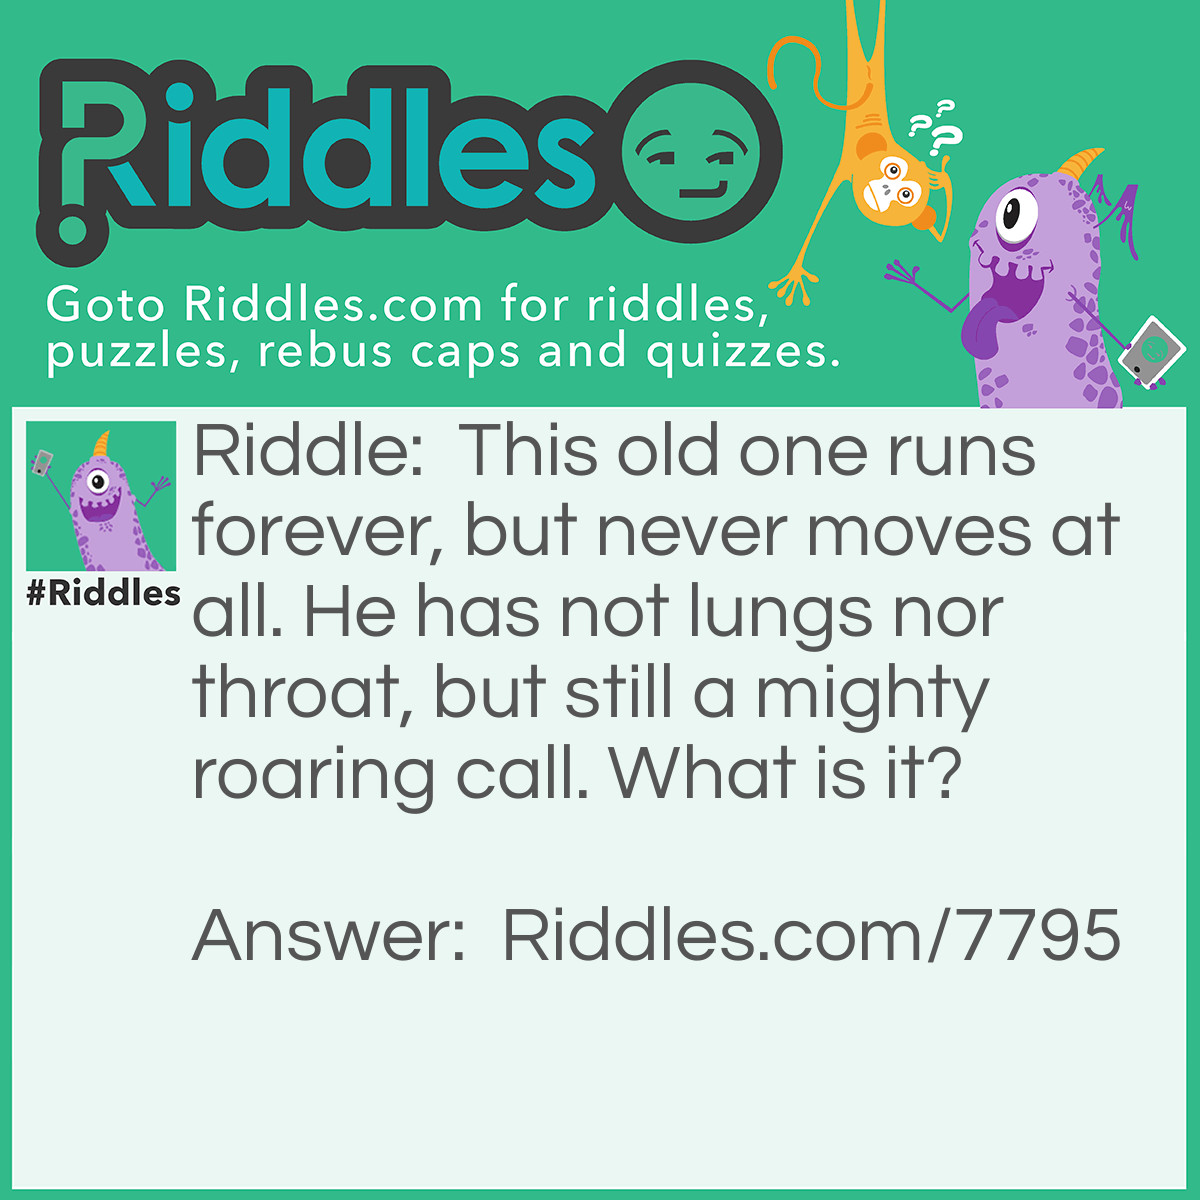 Riddle: This old one runs forever, but never moves at all. He has not lungs nor throat, but still a mighty roaring call. What is it? Answer: A Waterfall